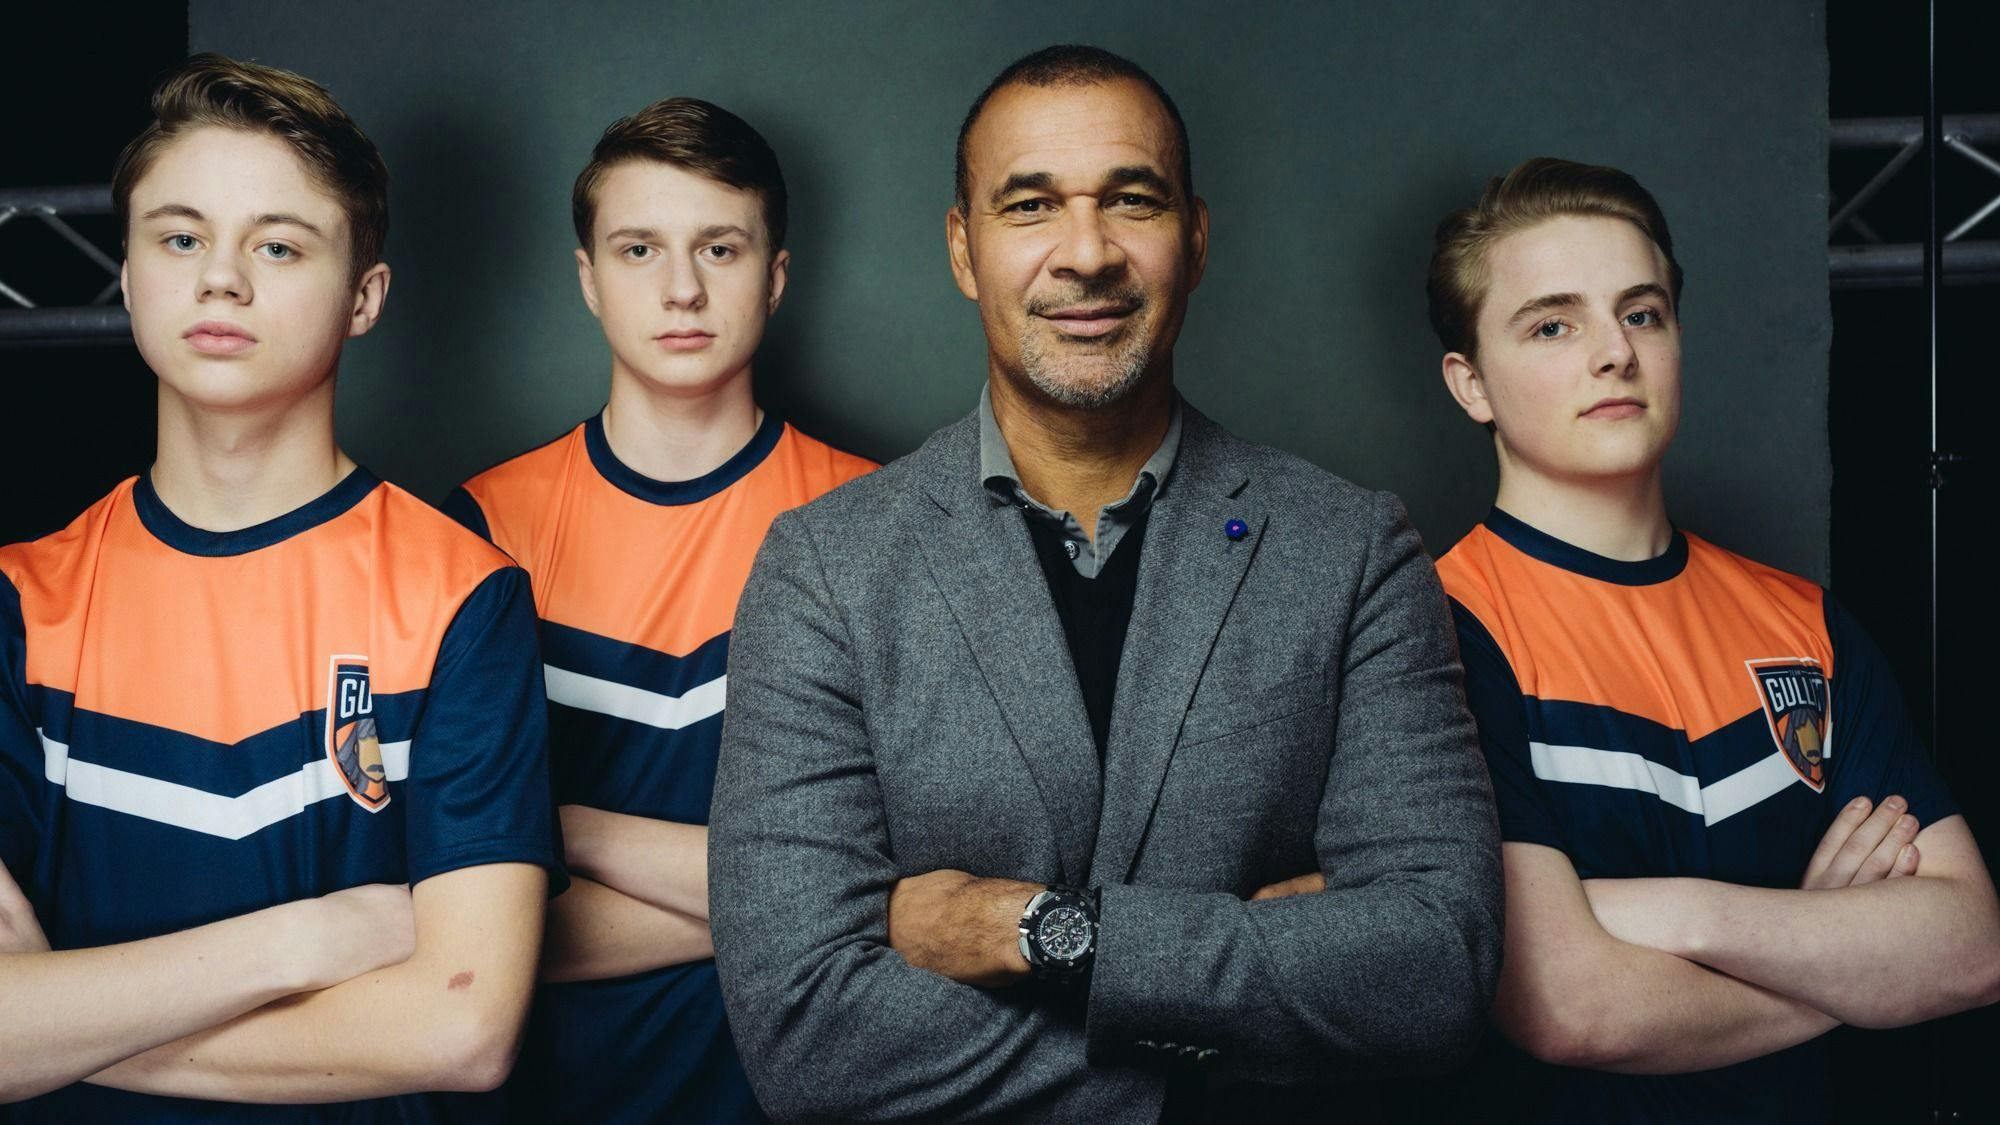 Ruud Gullit with some of his players.